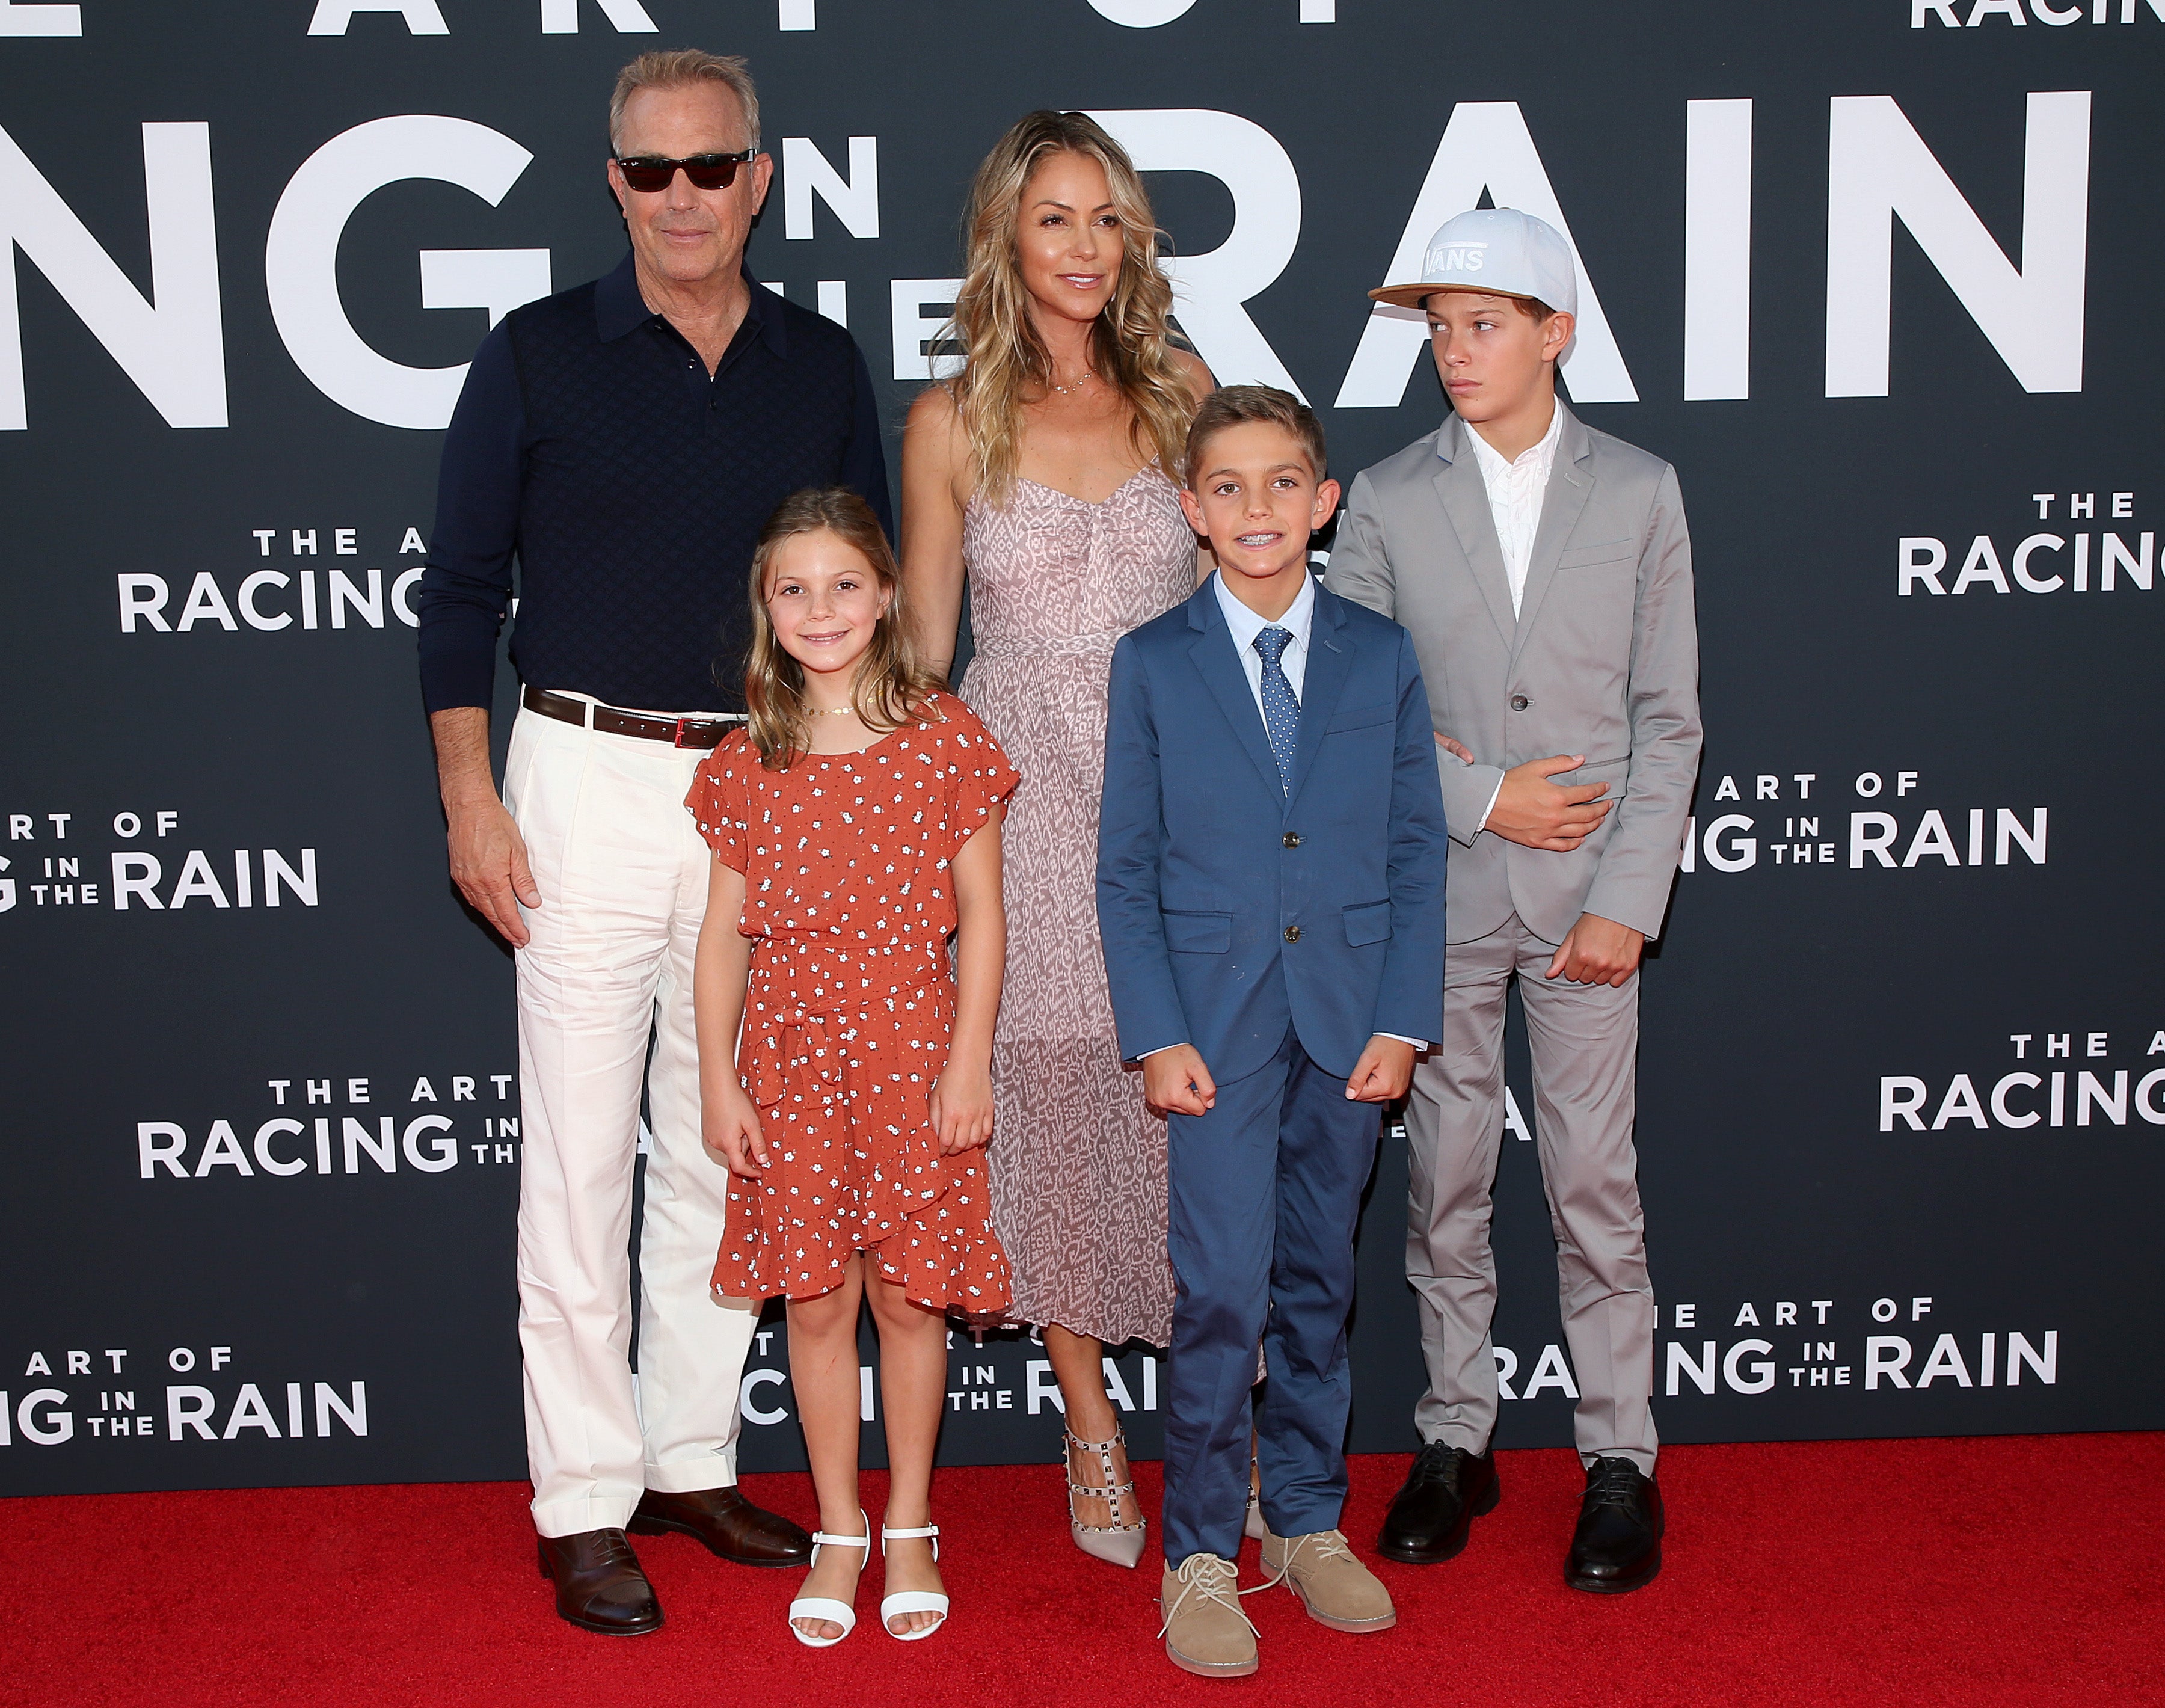 Kevin Costner and Christine Baumgartner attends the Premiere Of 20th Century Fox's "The Art Of Racing In The Rain" at El Capitan Theatre on August 01, 2019